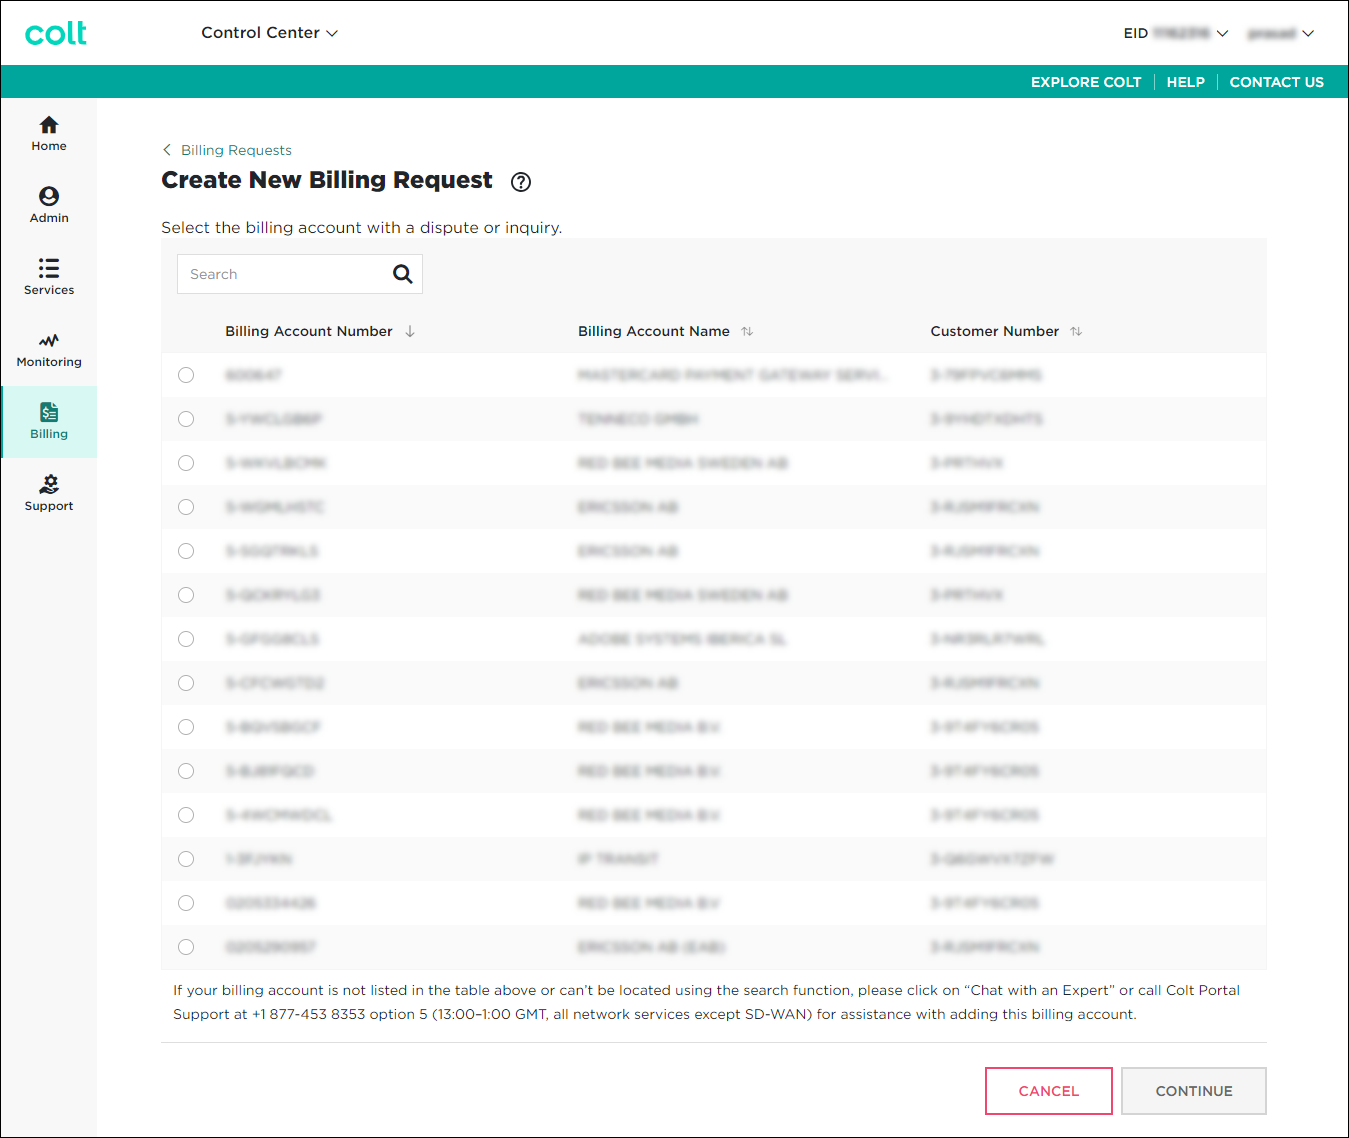 Create New Billing Request (showing billing accounts)